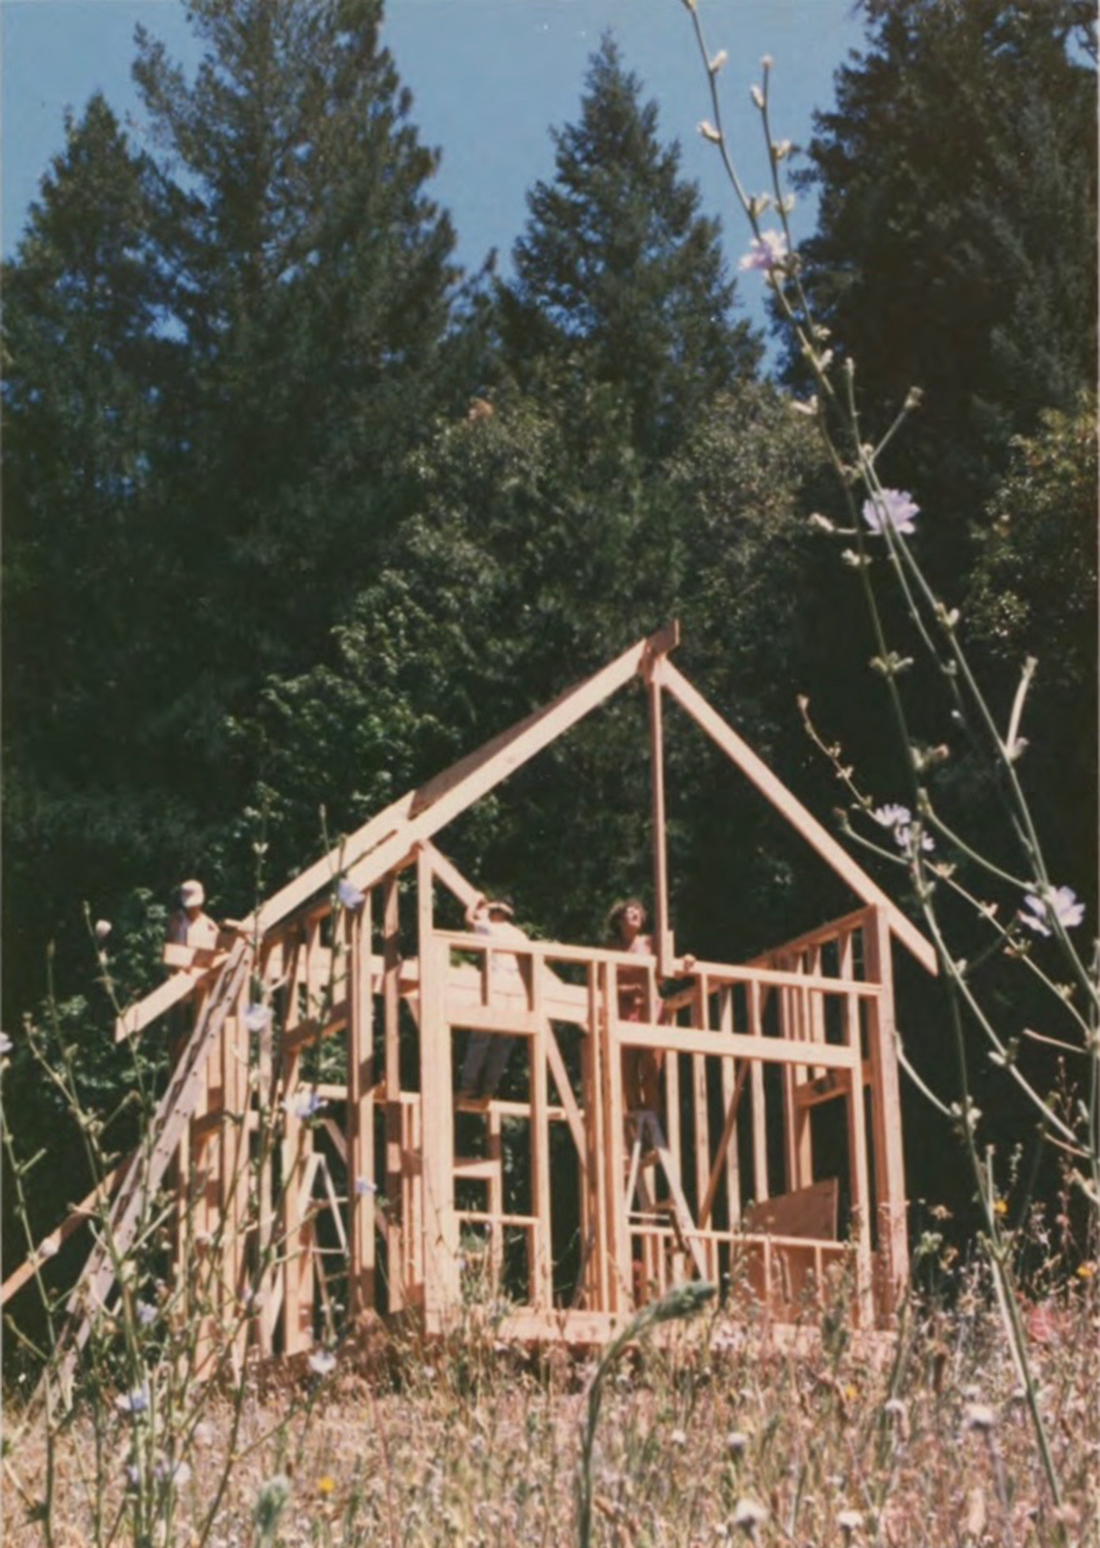 Low-angle view of several women working together to construct a wooden cabin in a field with tall, green pines in the background